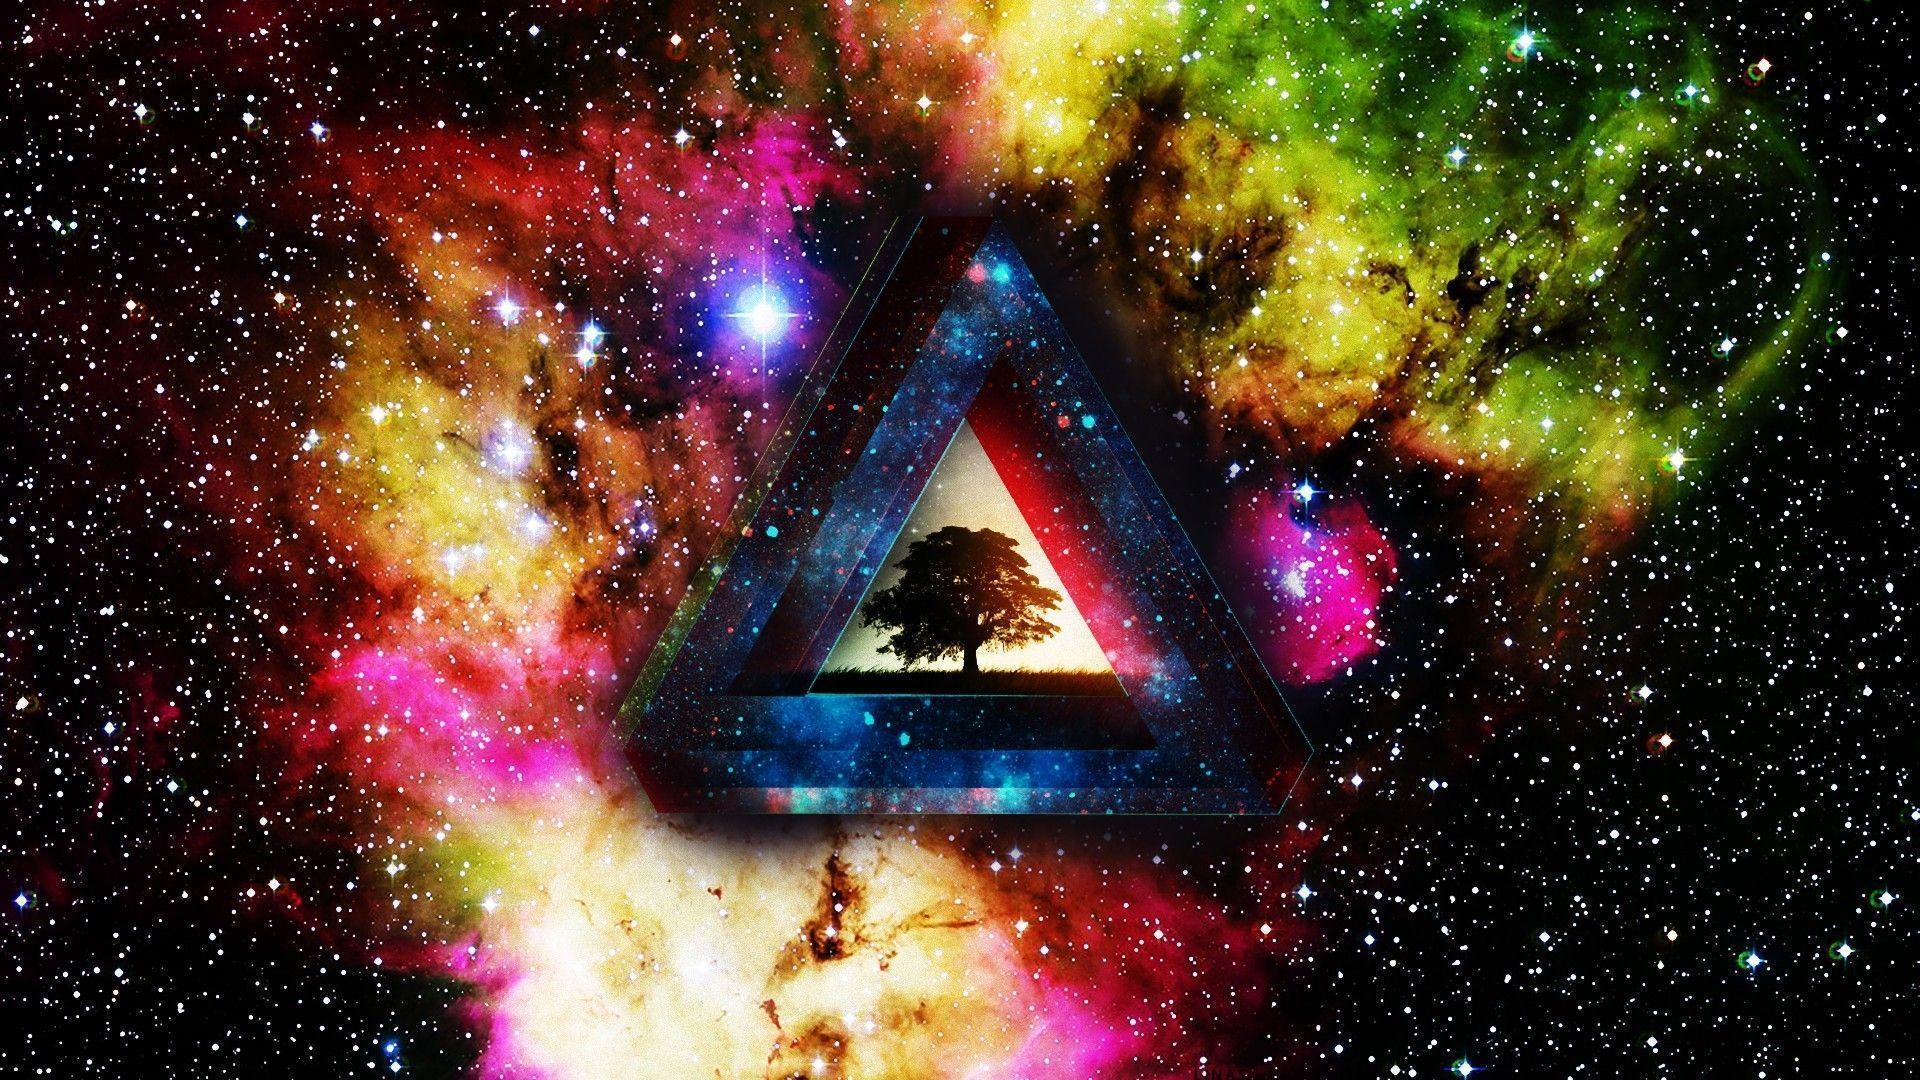 trippy space wallpapers hd iphone